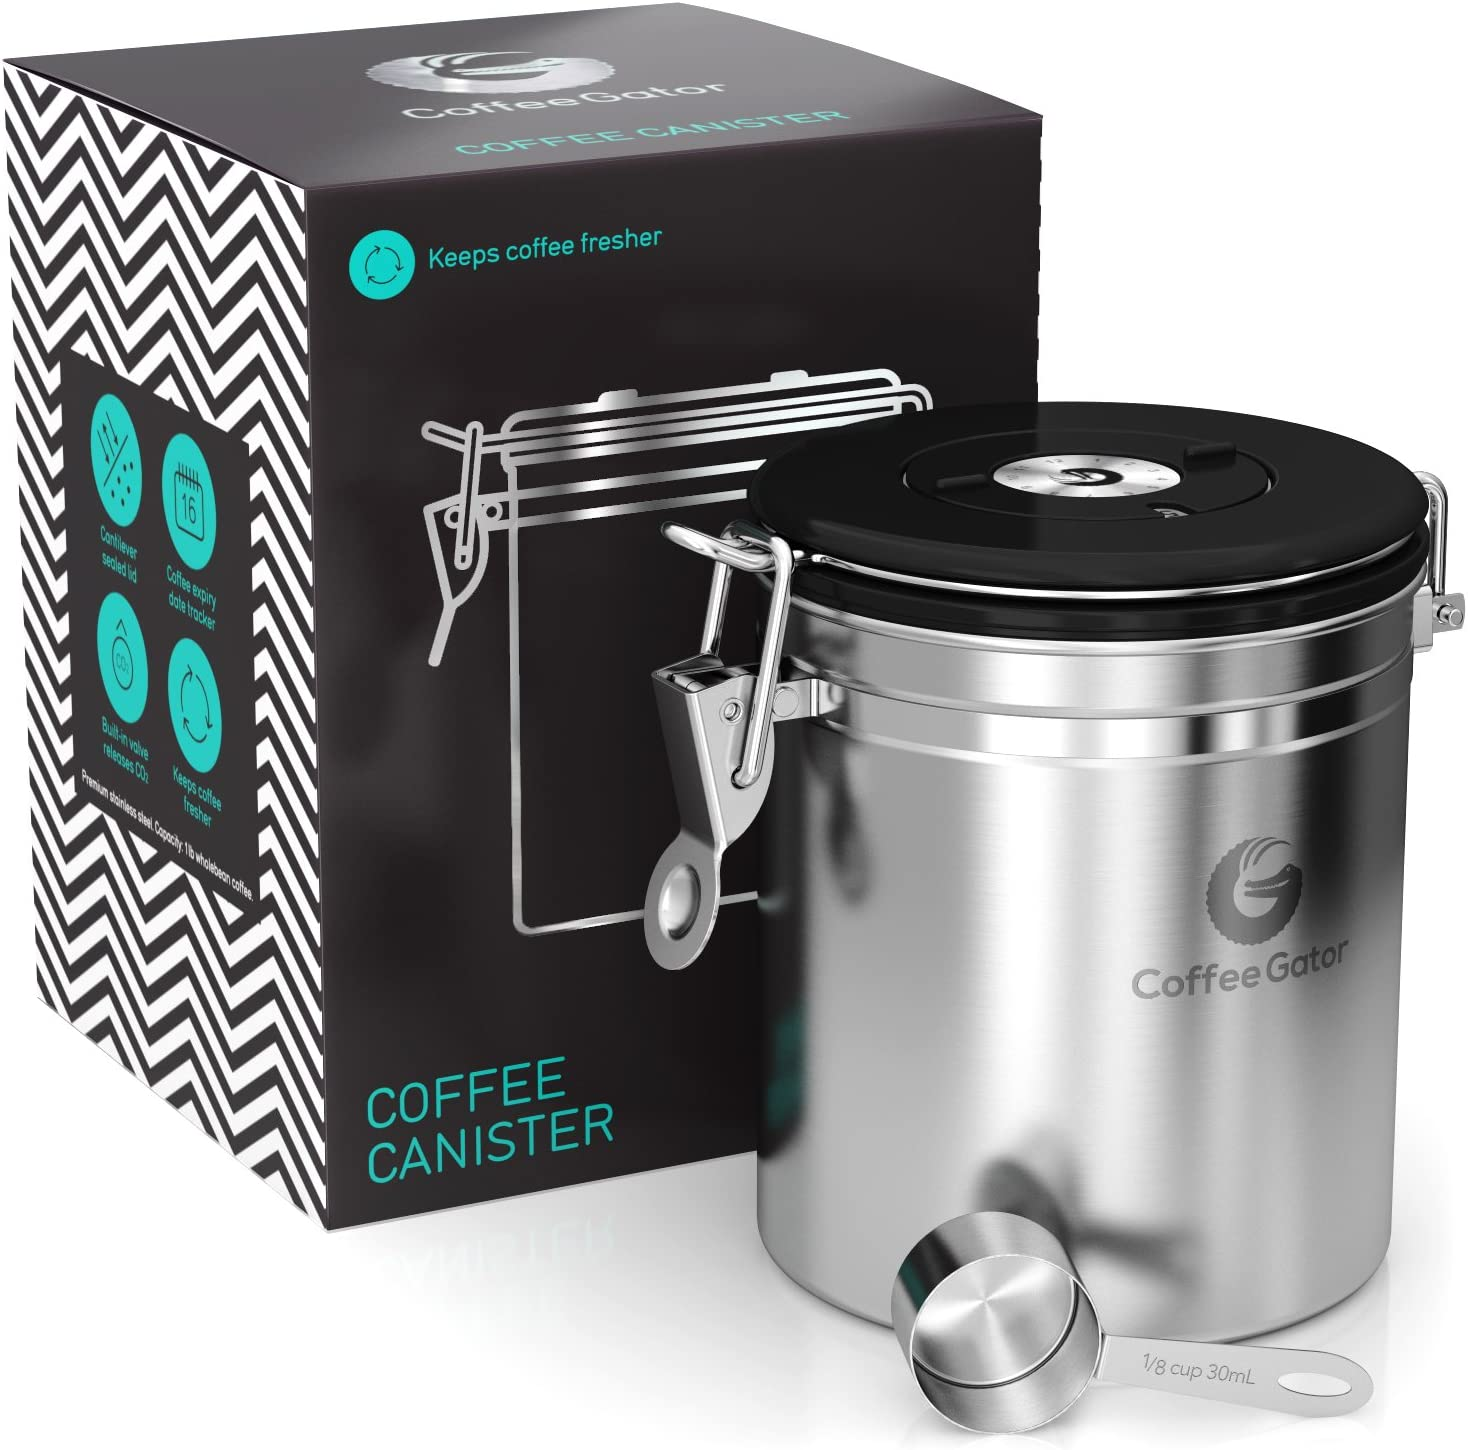 16 Oz Coffee Gator Stainless Steel Coffee Grounds and Beans Container Canister with Date-Tracker, CO2-Release Valve and Measuring Scoop $13.44